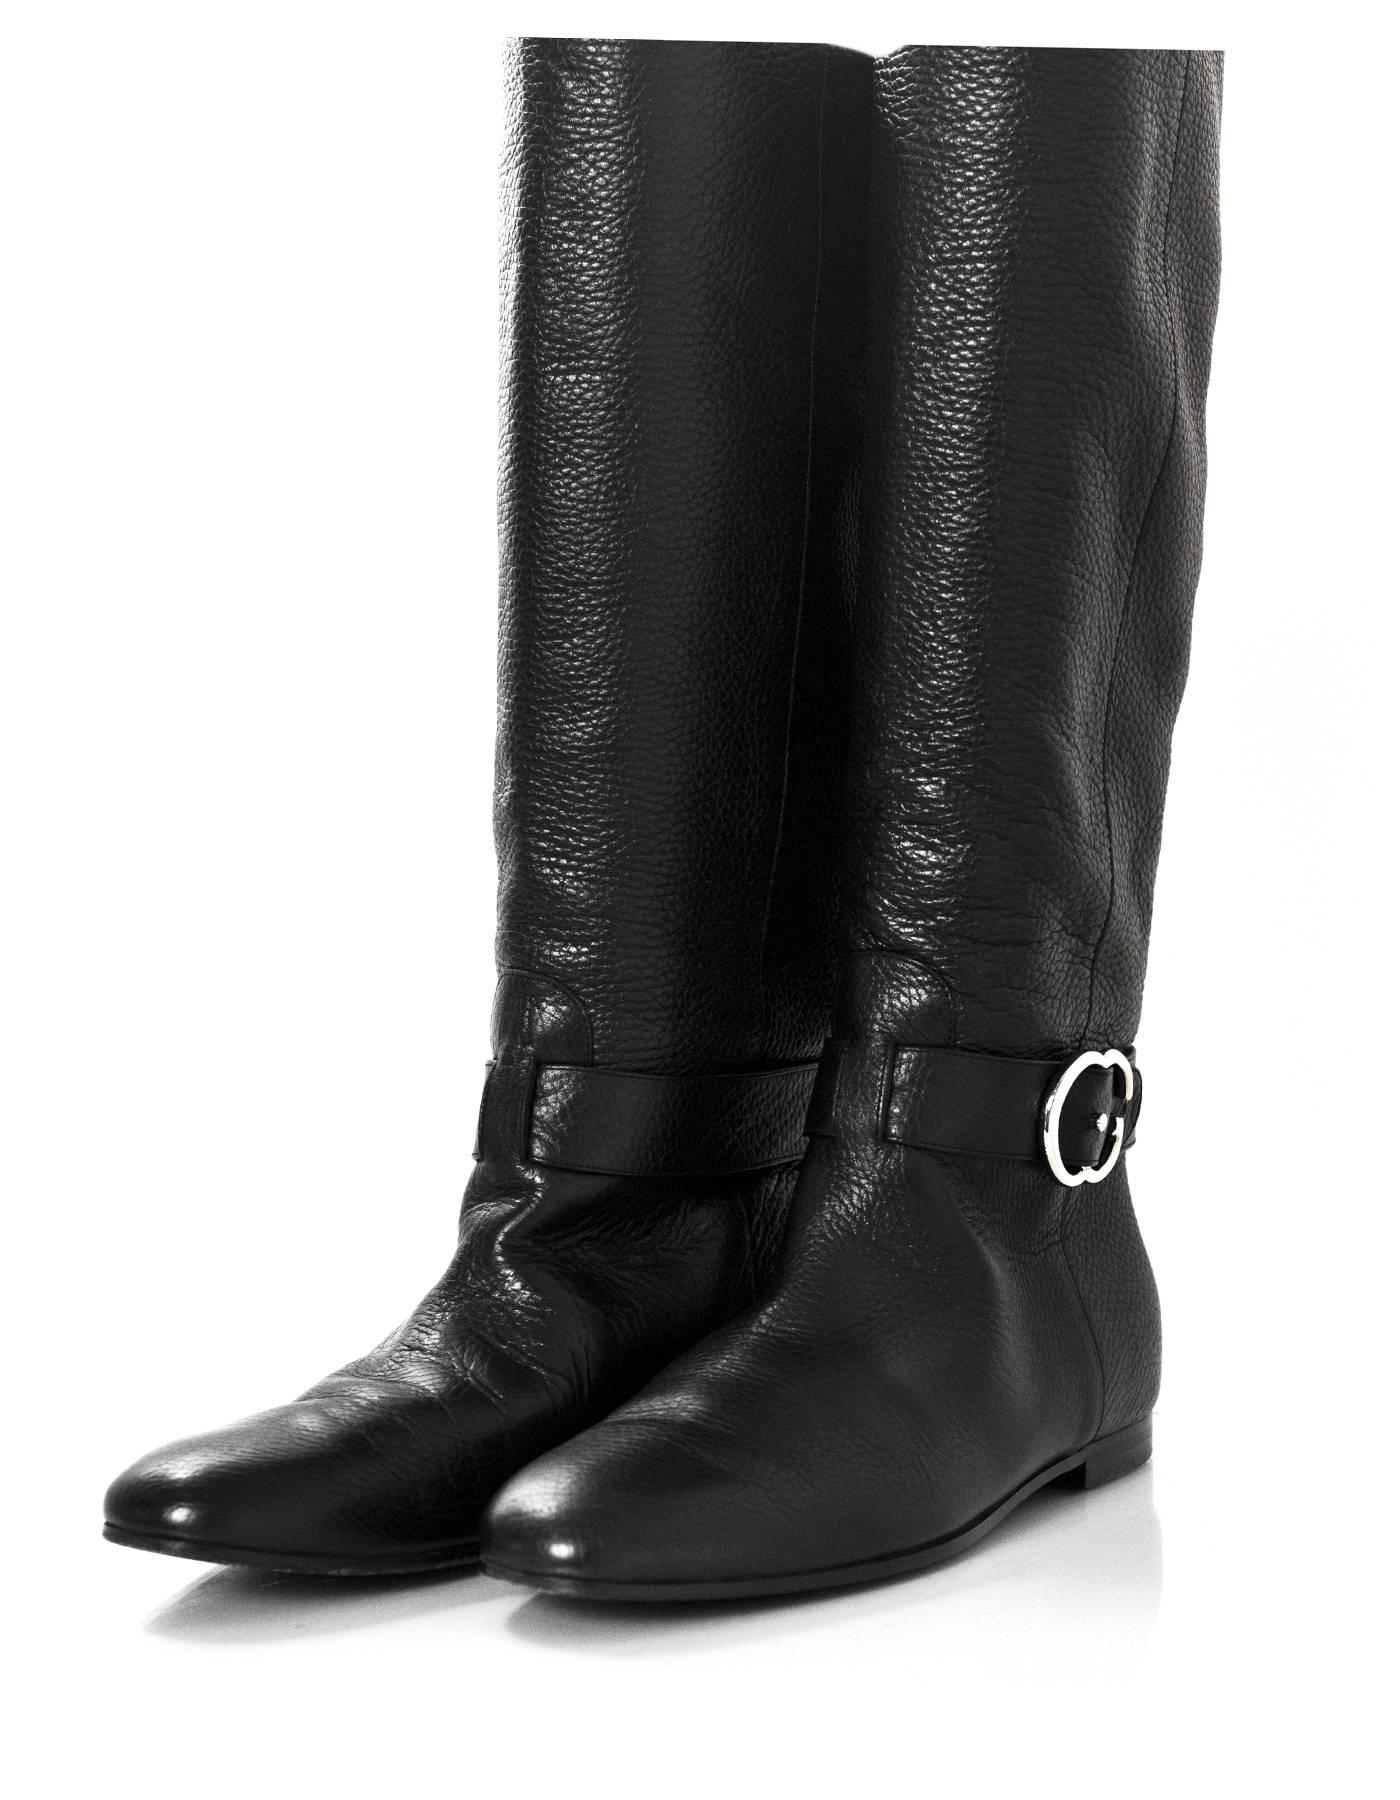 Gucci Black Pebbled Leather Boots Sz 37.5

Features logo buckle at ankles

Made In: Italy
Color: Black
Materials: Leather
Closure/Opening: Pull on
Sole Stamp: Gucci Made in Italy 37.5
Overall Condition: Excellent pre-owned condition with the